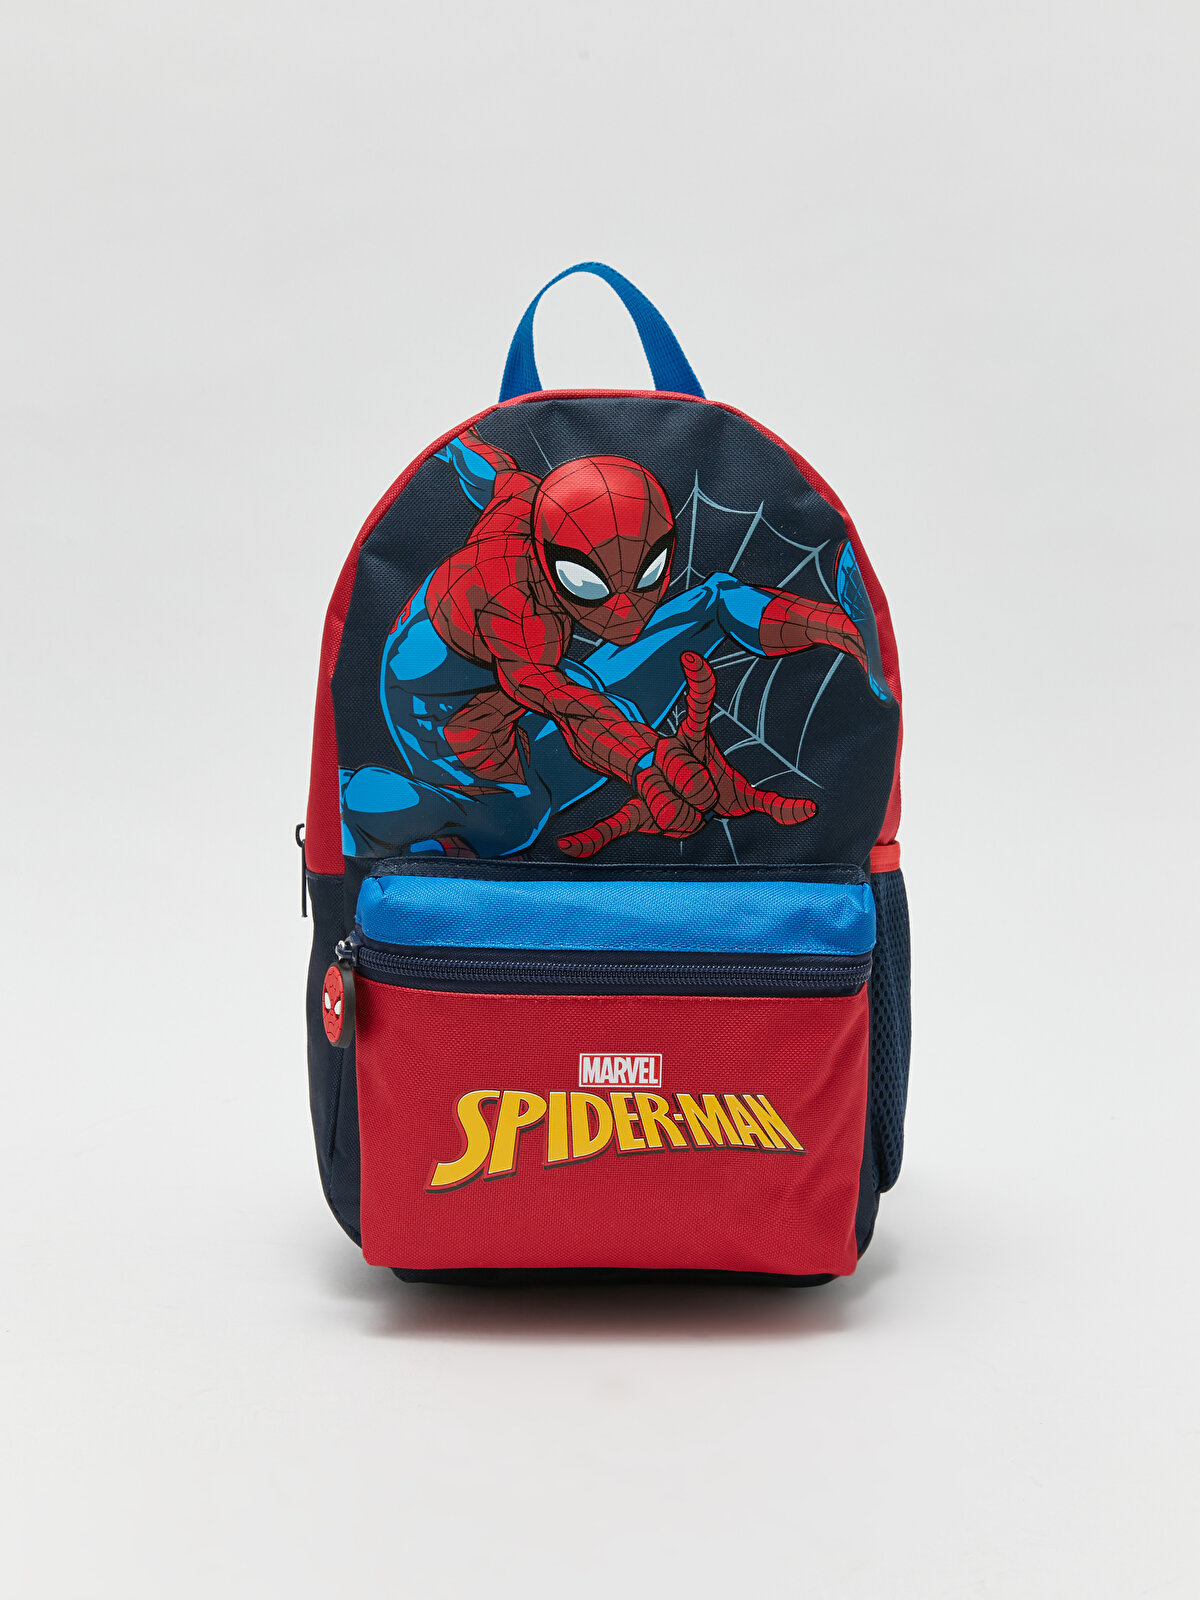 Spiderman Printed Boy's Backpack -W33423Z4-CRP - W33423Z4-CRP - LC 